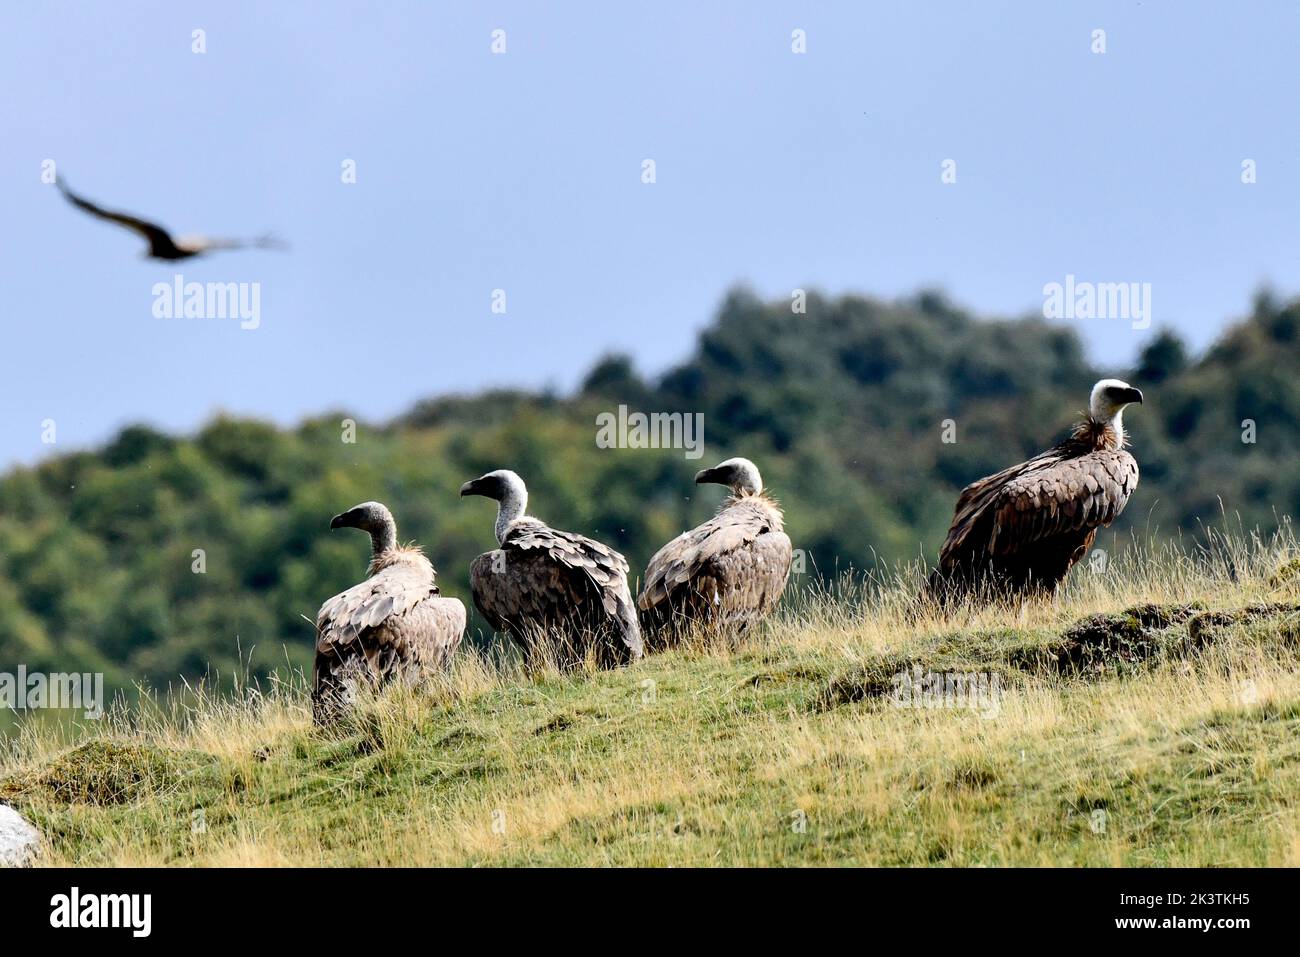 Griffin vultures on Col du Pourtalet, Vallee D'Ossau in the pyrenees on the border of France and Spain. Stock Photo